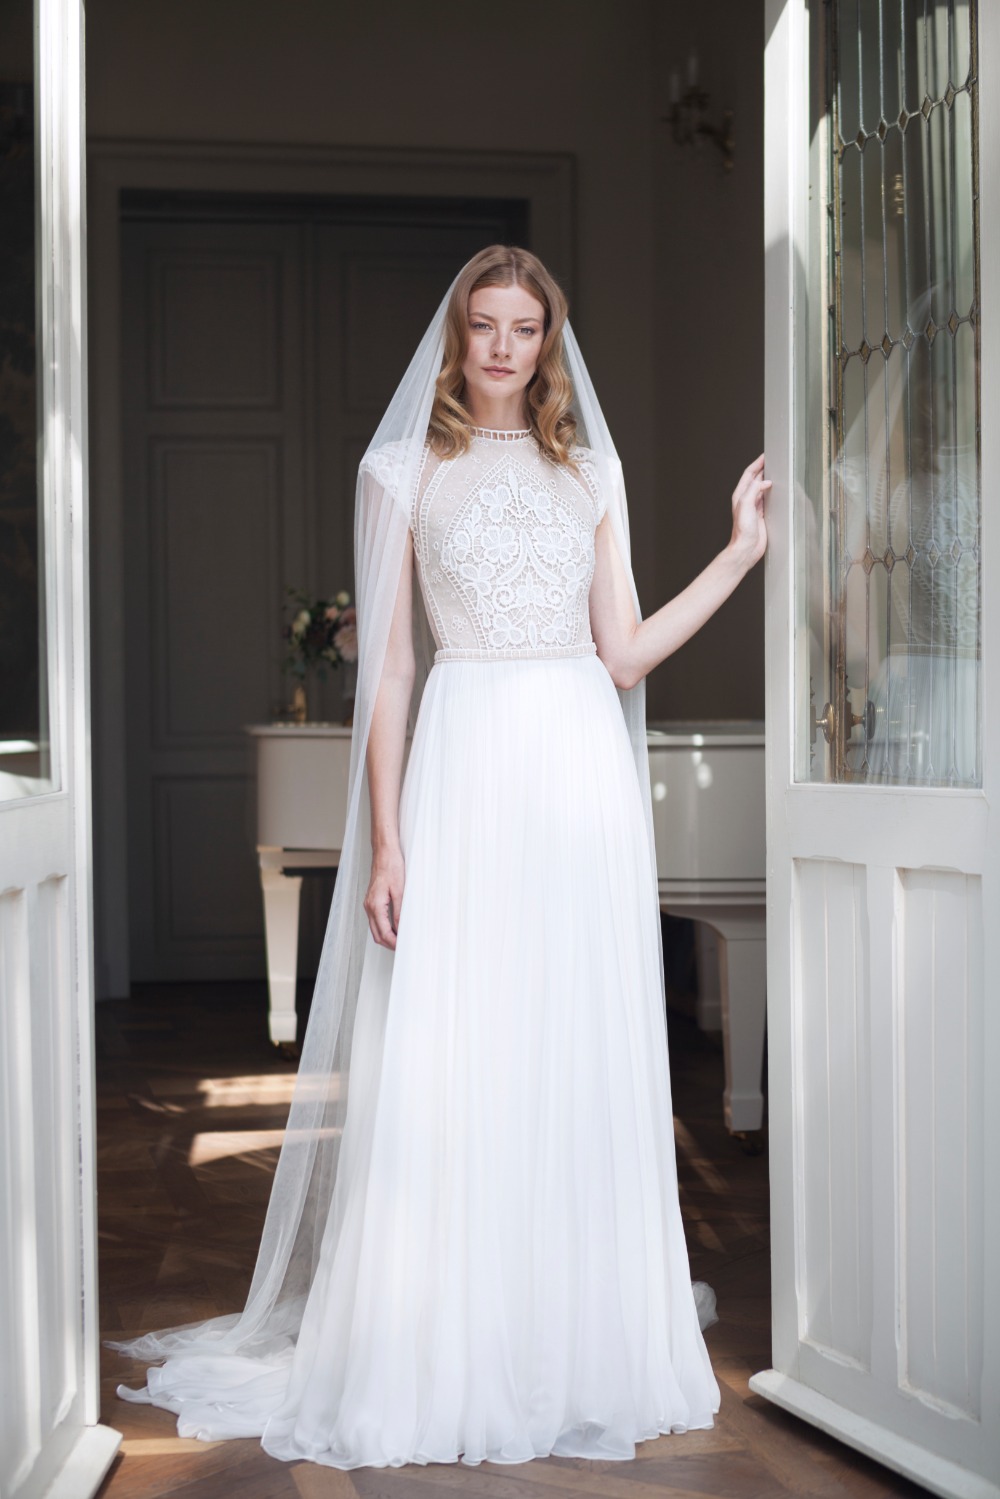 say "I do" in a Divine Atelier wedding gown